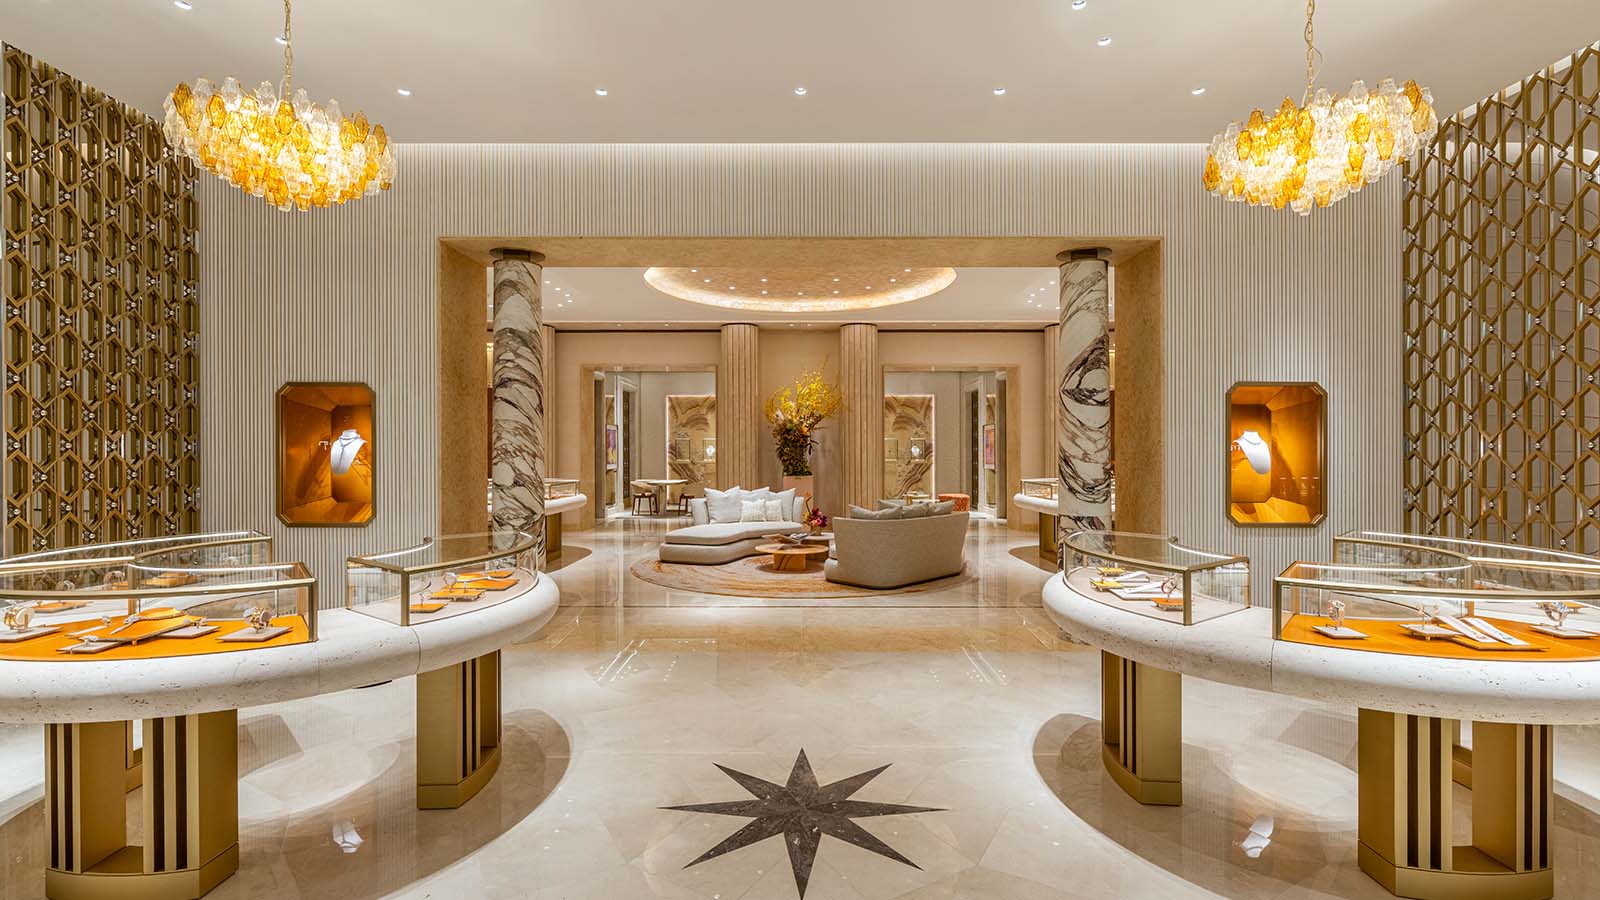 Bulgari South Coast Plaza Is Home To Select Timepieces & Jewelry